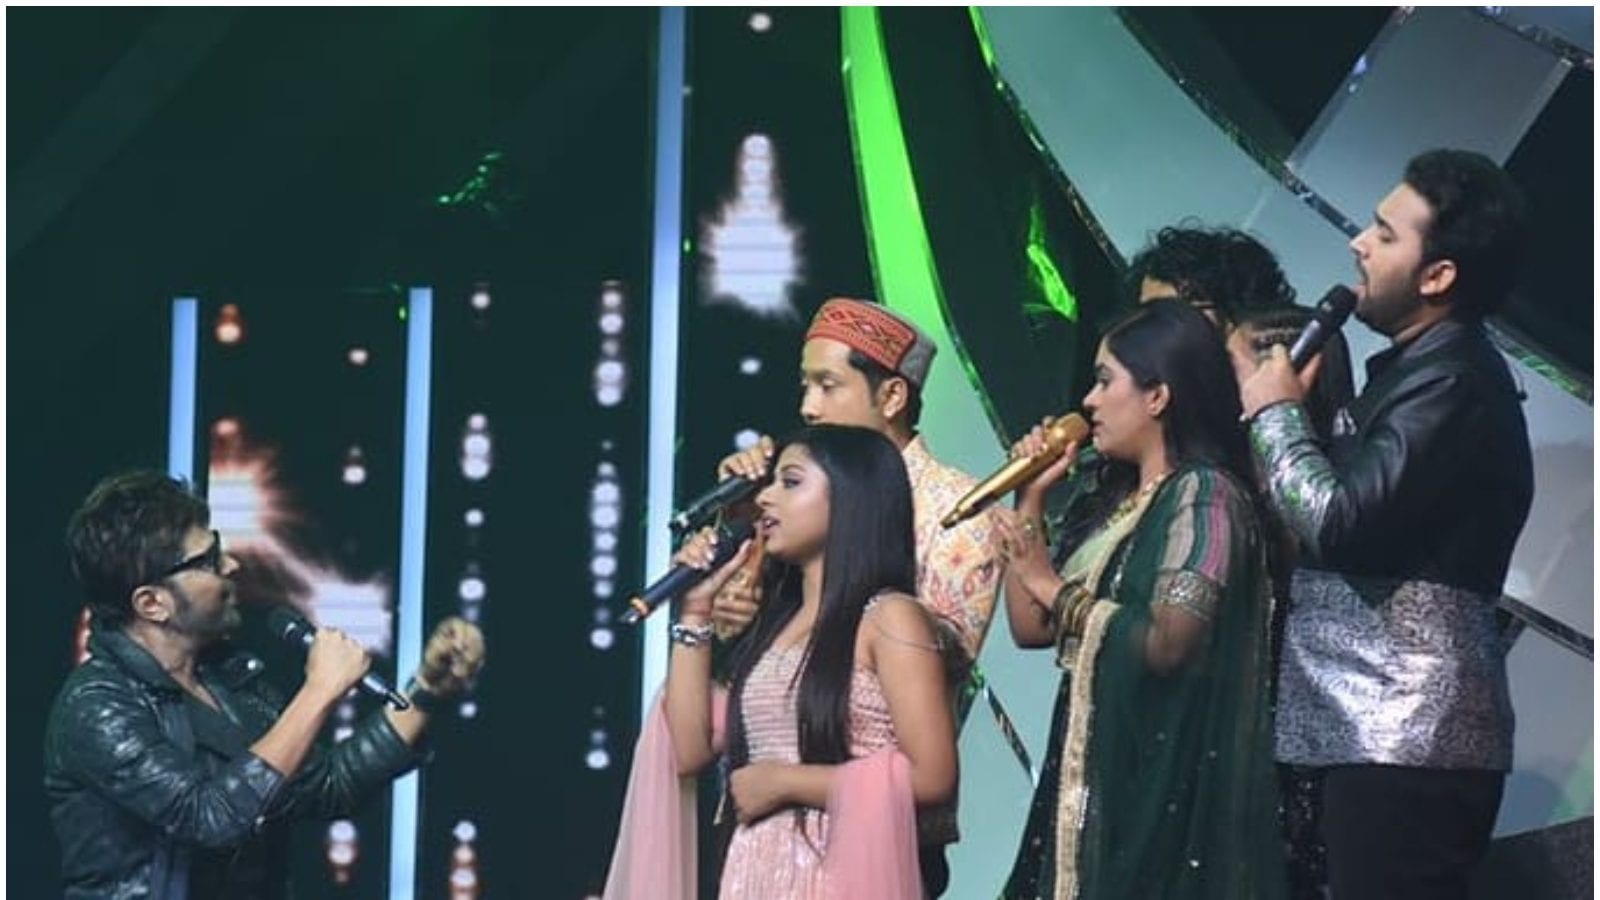 Indian Idol 12 Finale: Netizens Have the Funniest Reactions to 'Never-ending' 12-hour Episode